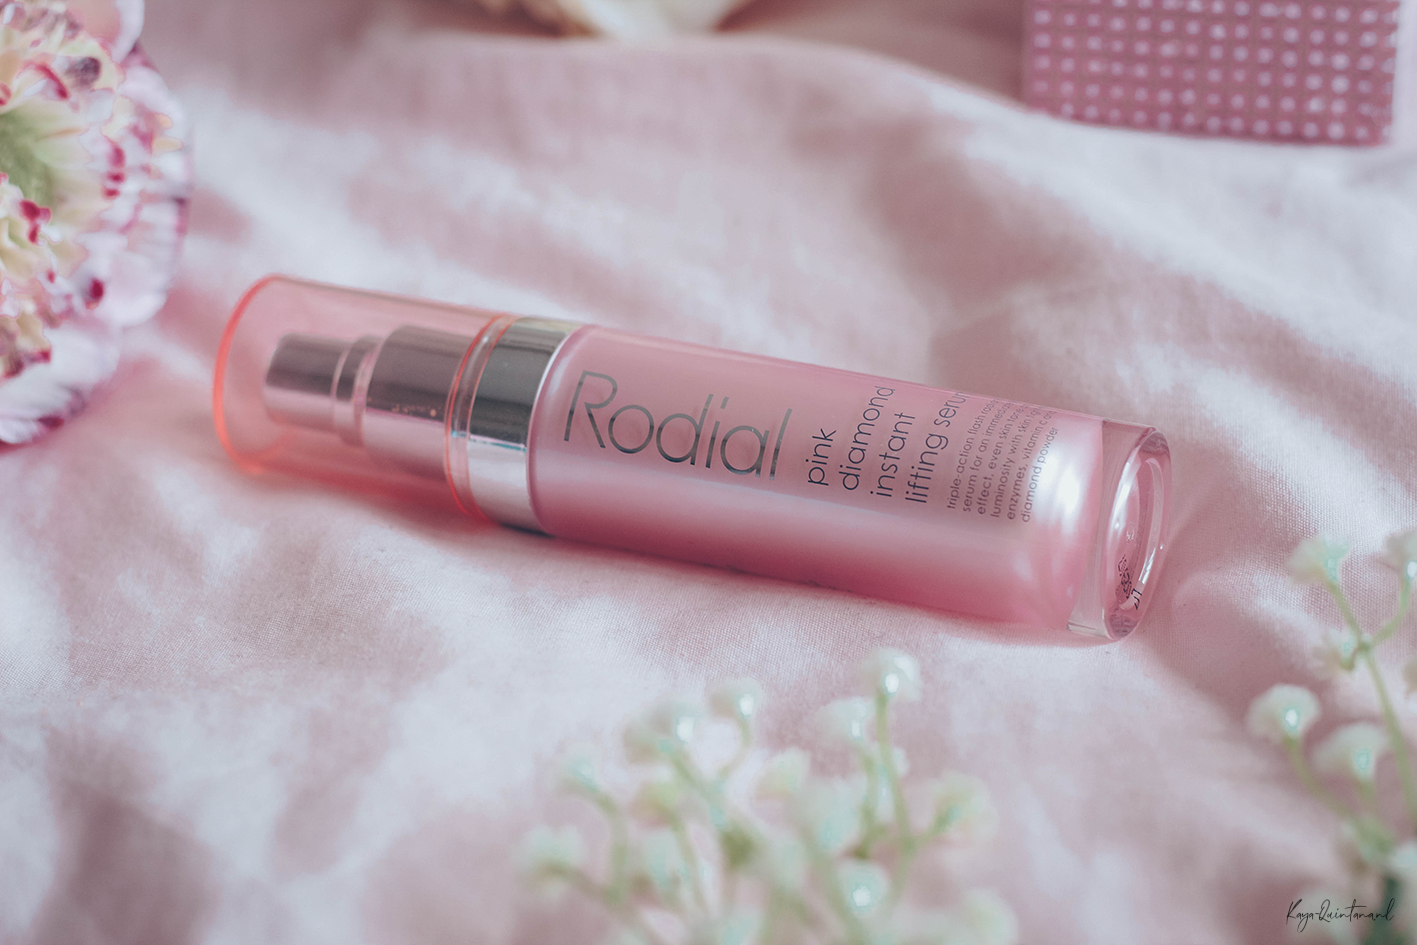 Rodial Pink diamond instant lifting serum review